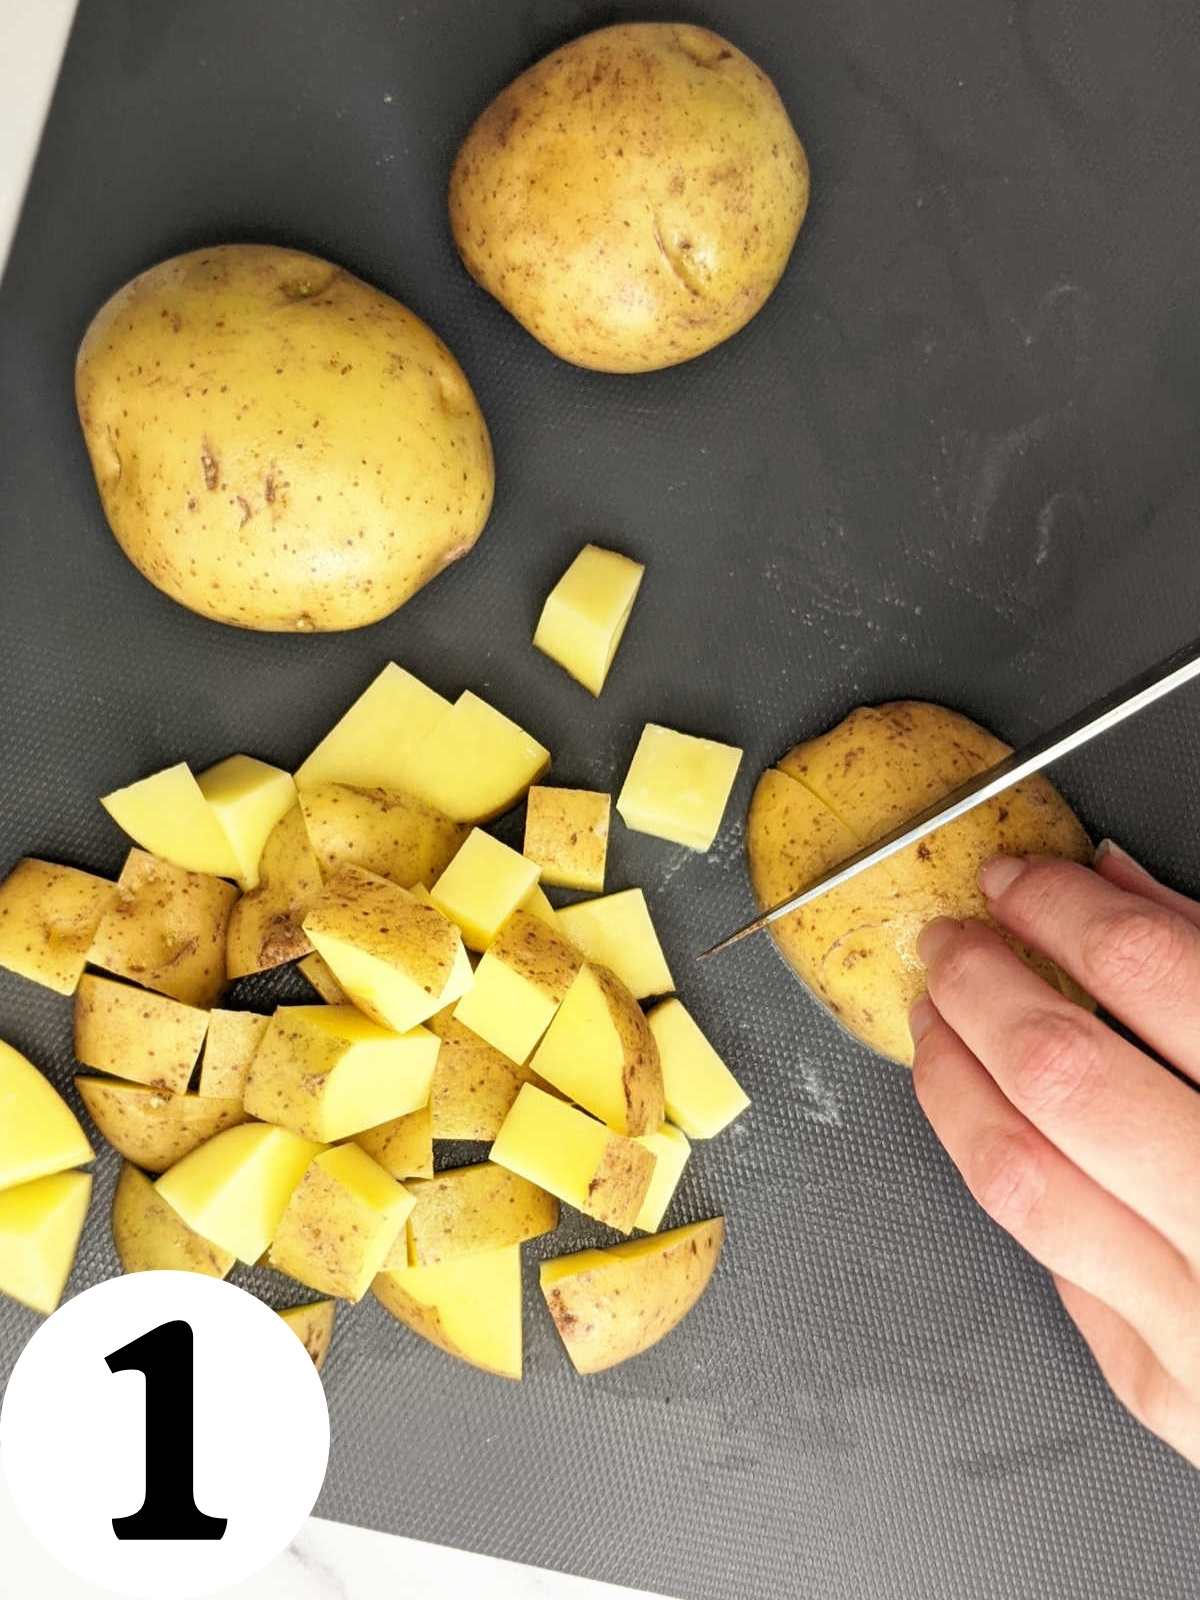 Slicing potatoes into ½ inch cubes.